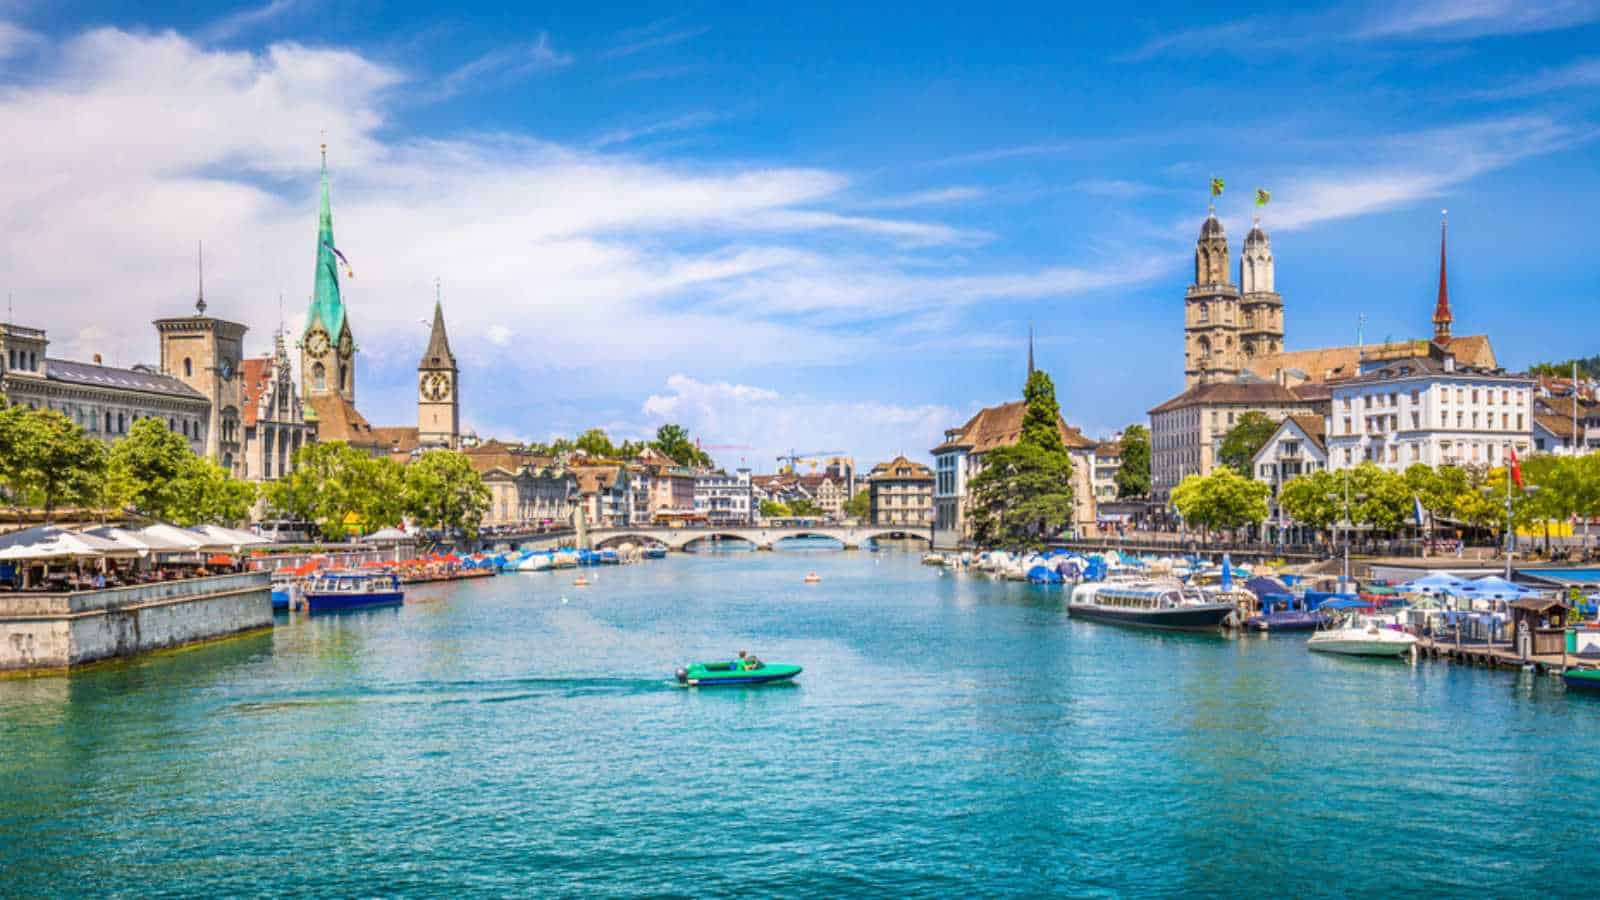 Panoramic view of historic Zurich city center with famous Fraumunster and Grossmunster Churches and river Limmat at Lake Zurich on a sunny day with clouds in summer, Canton of Zurich, Switzerland